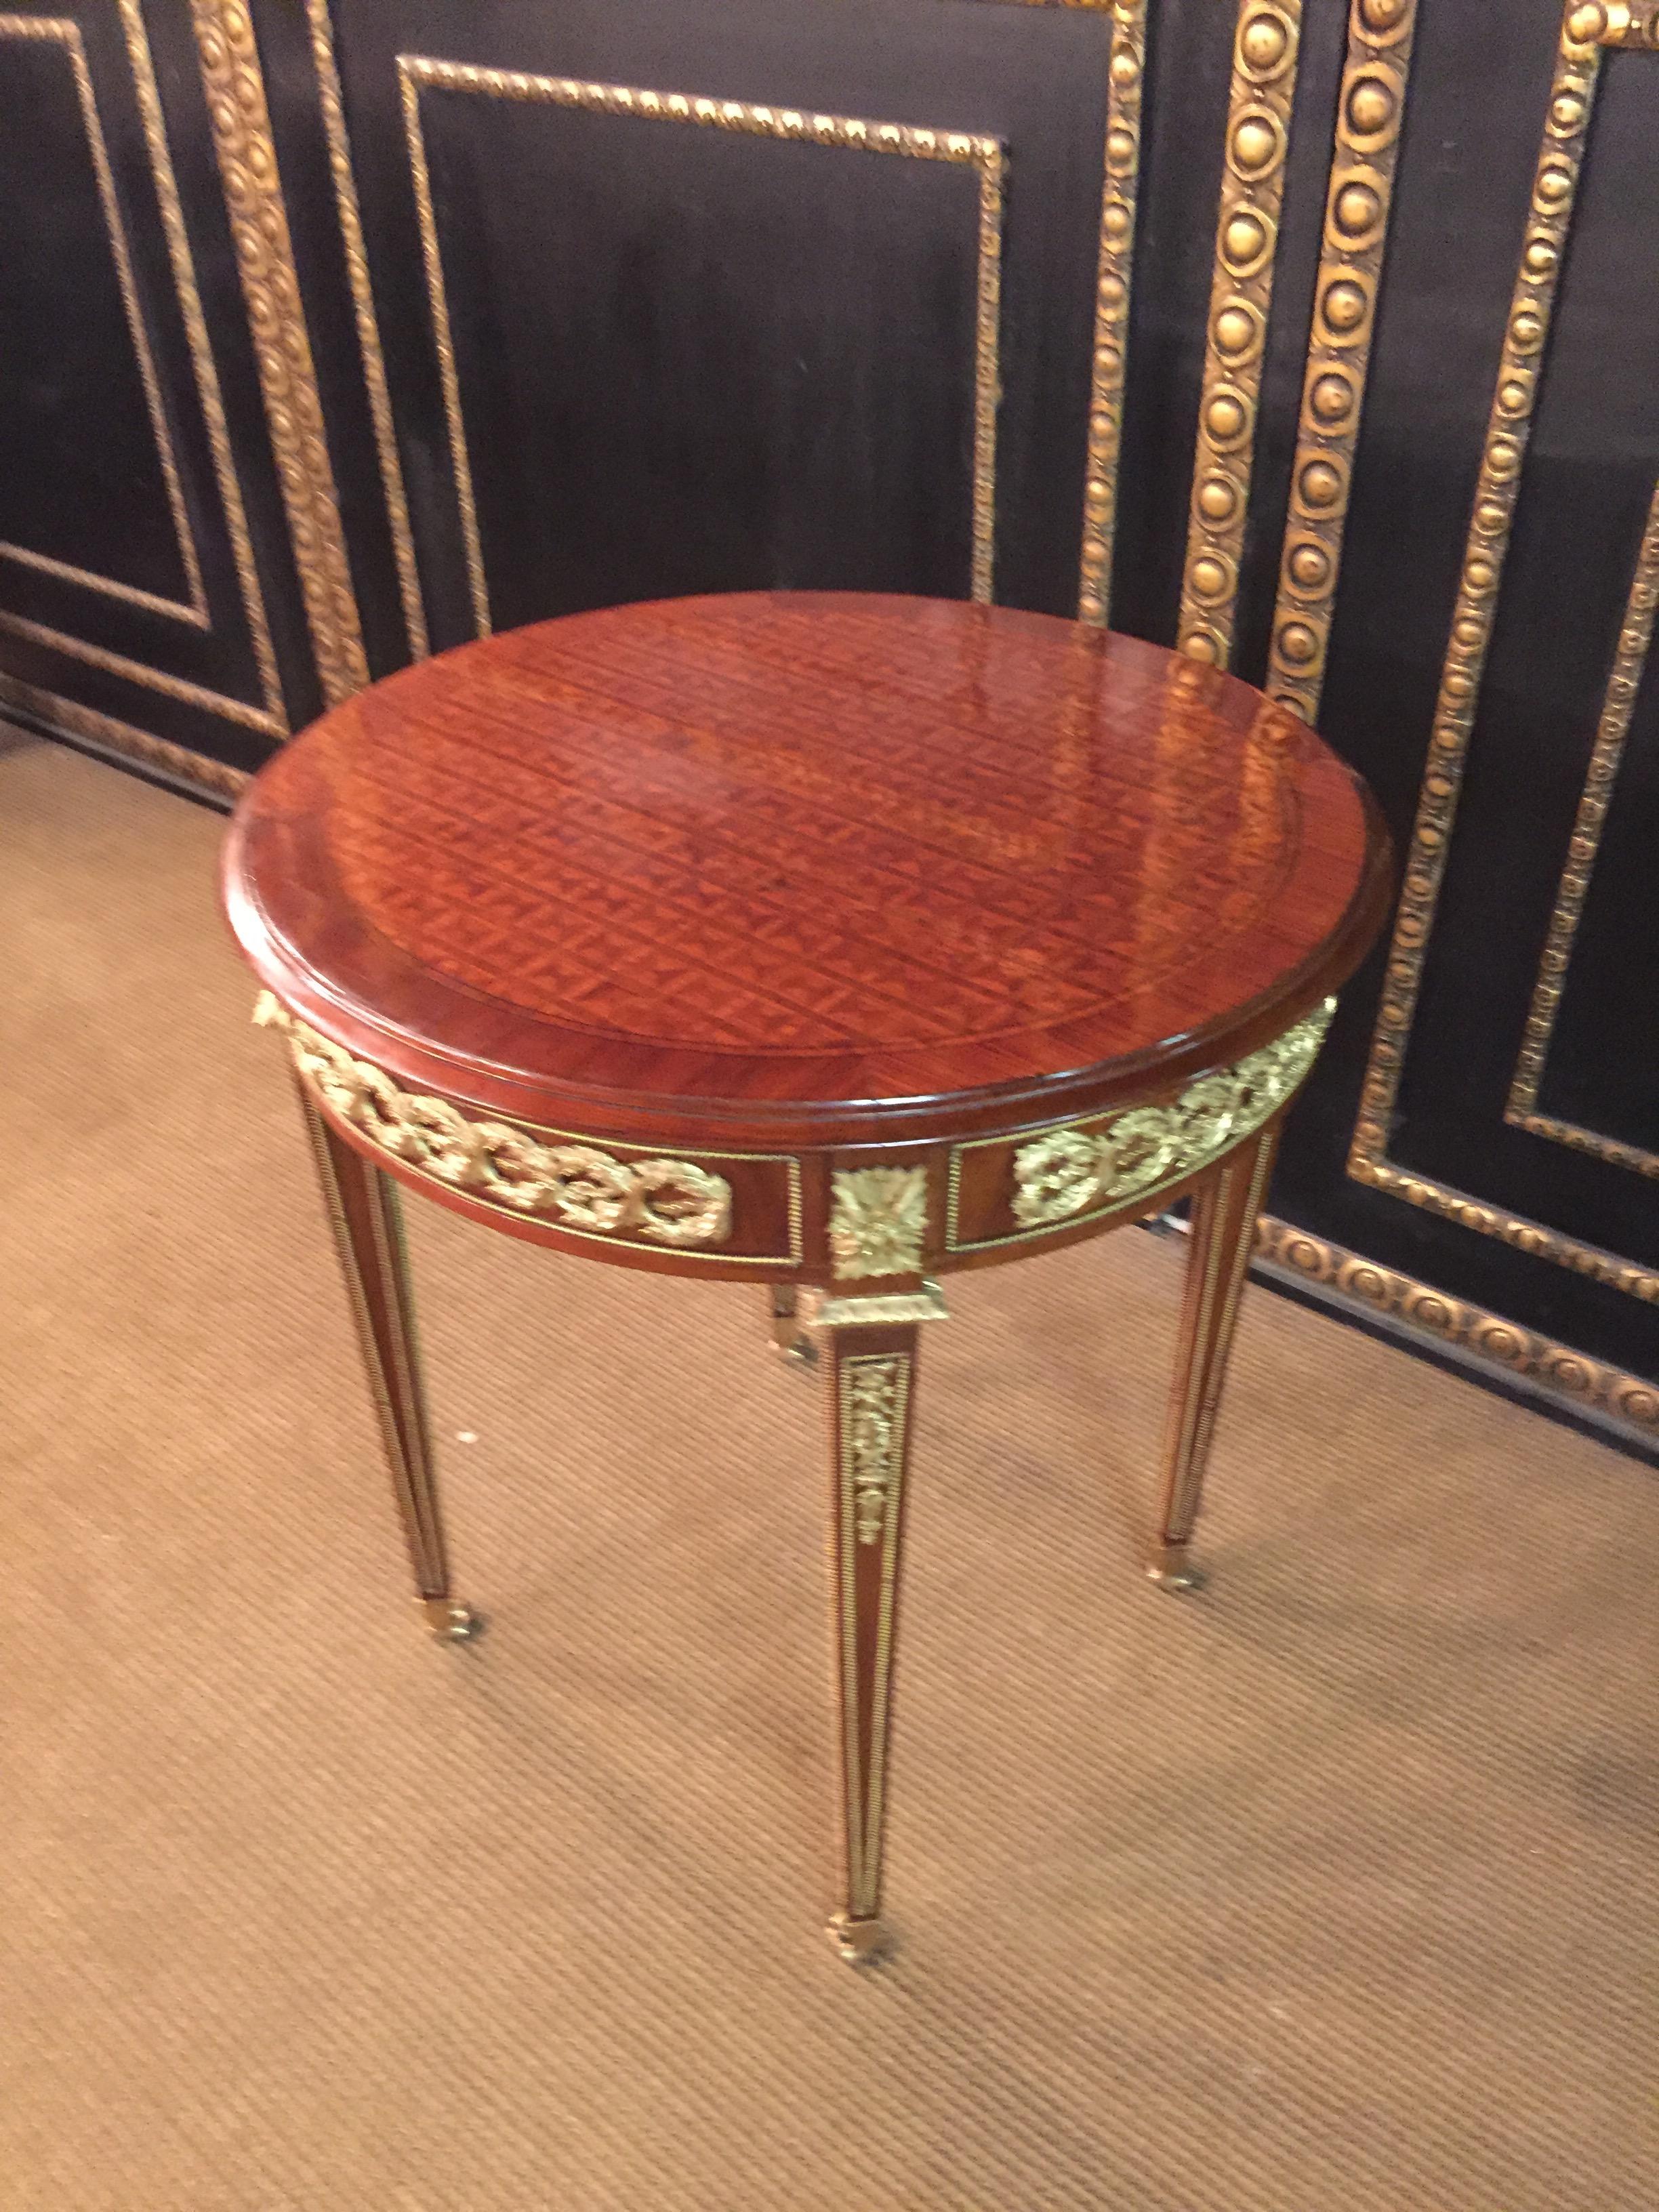 20th Century Louis XVI Style with Round Platte with Inlays French Table 1